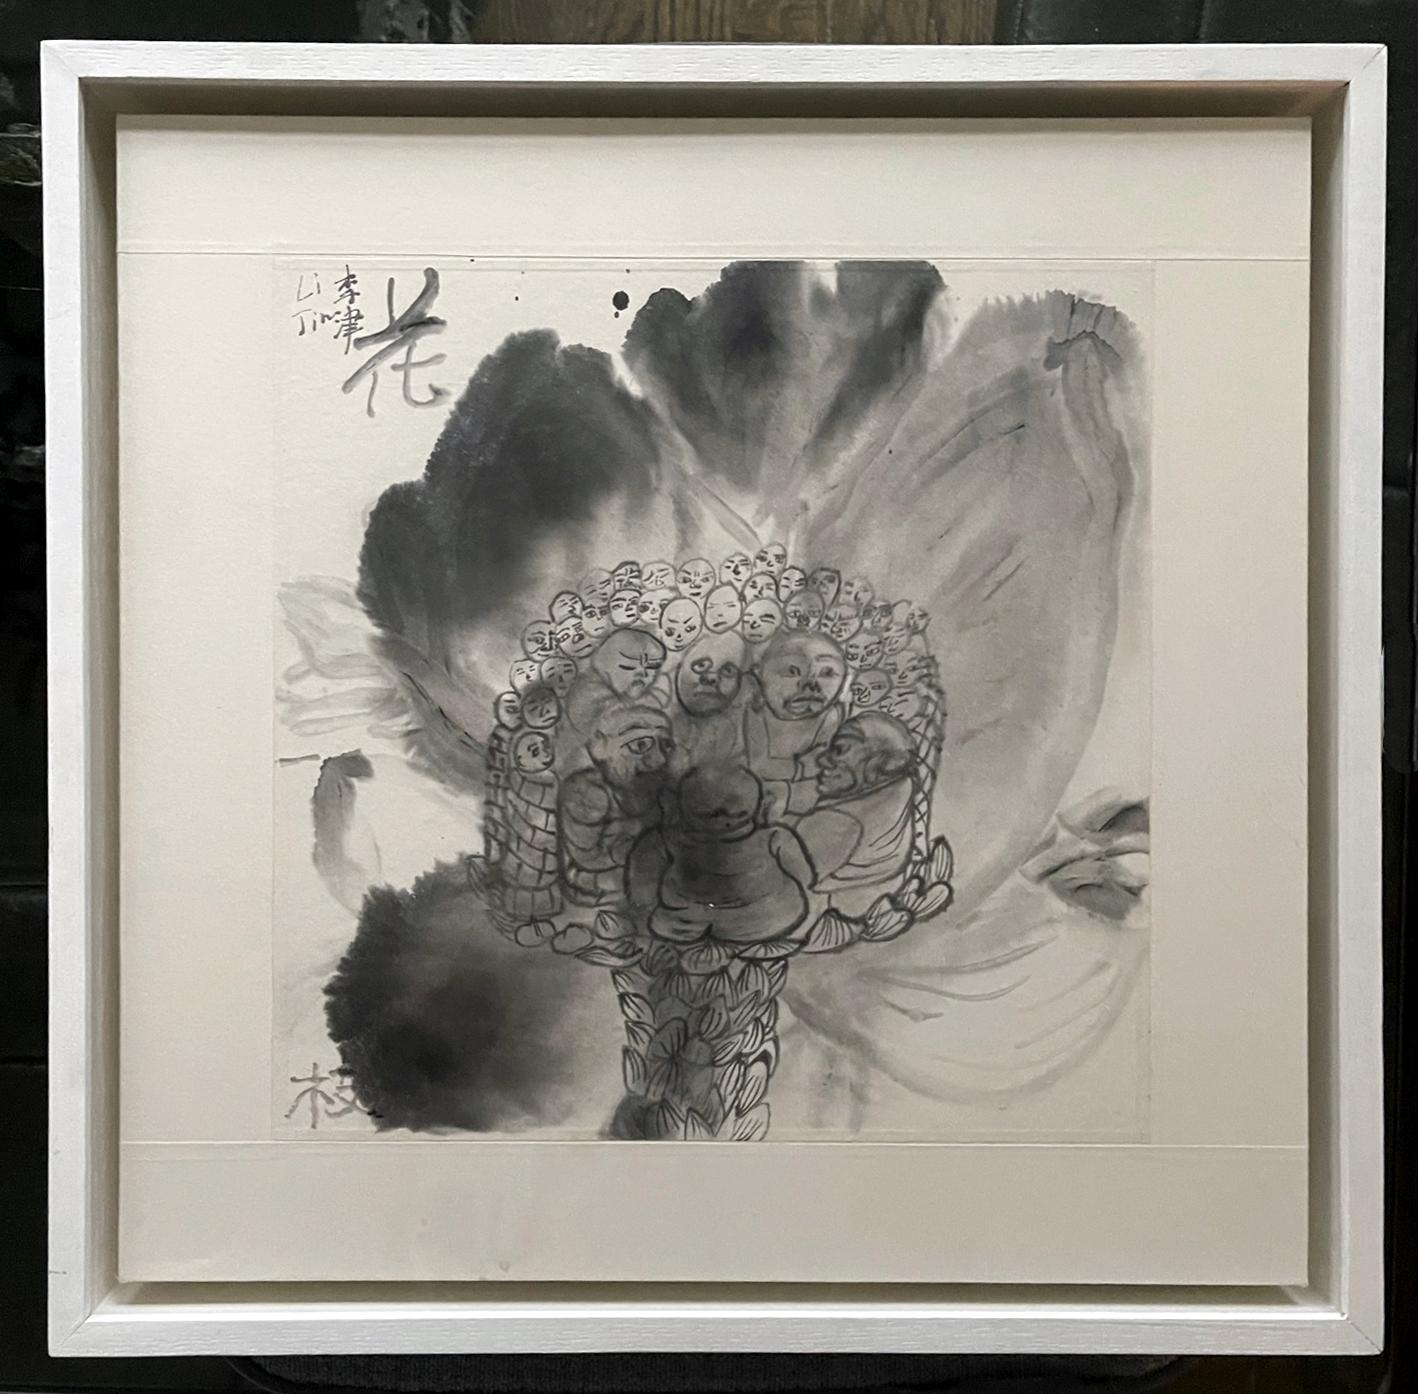 A contemporary ink painting on paper by Chinese artist Li Jin (1958-) presented in a white shadowbox frame. Entitled in English 